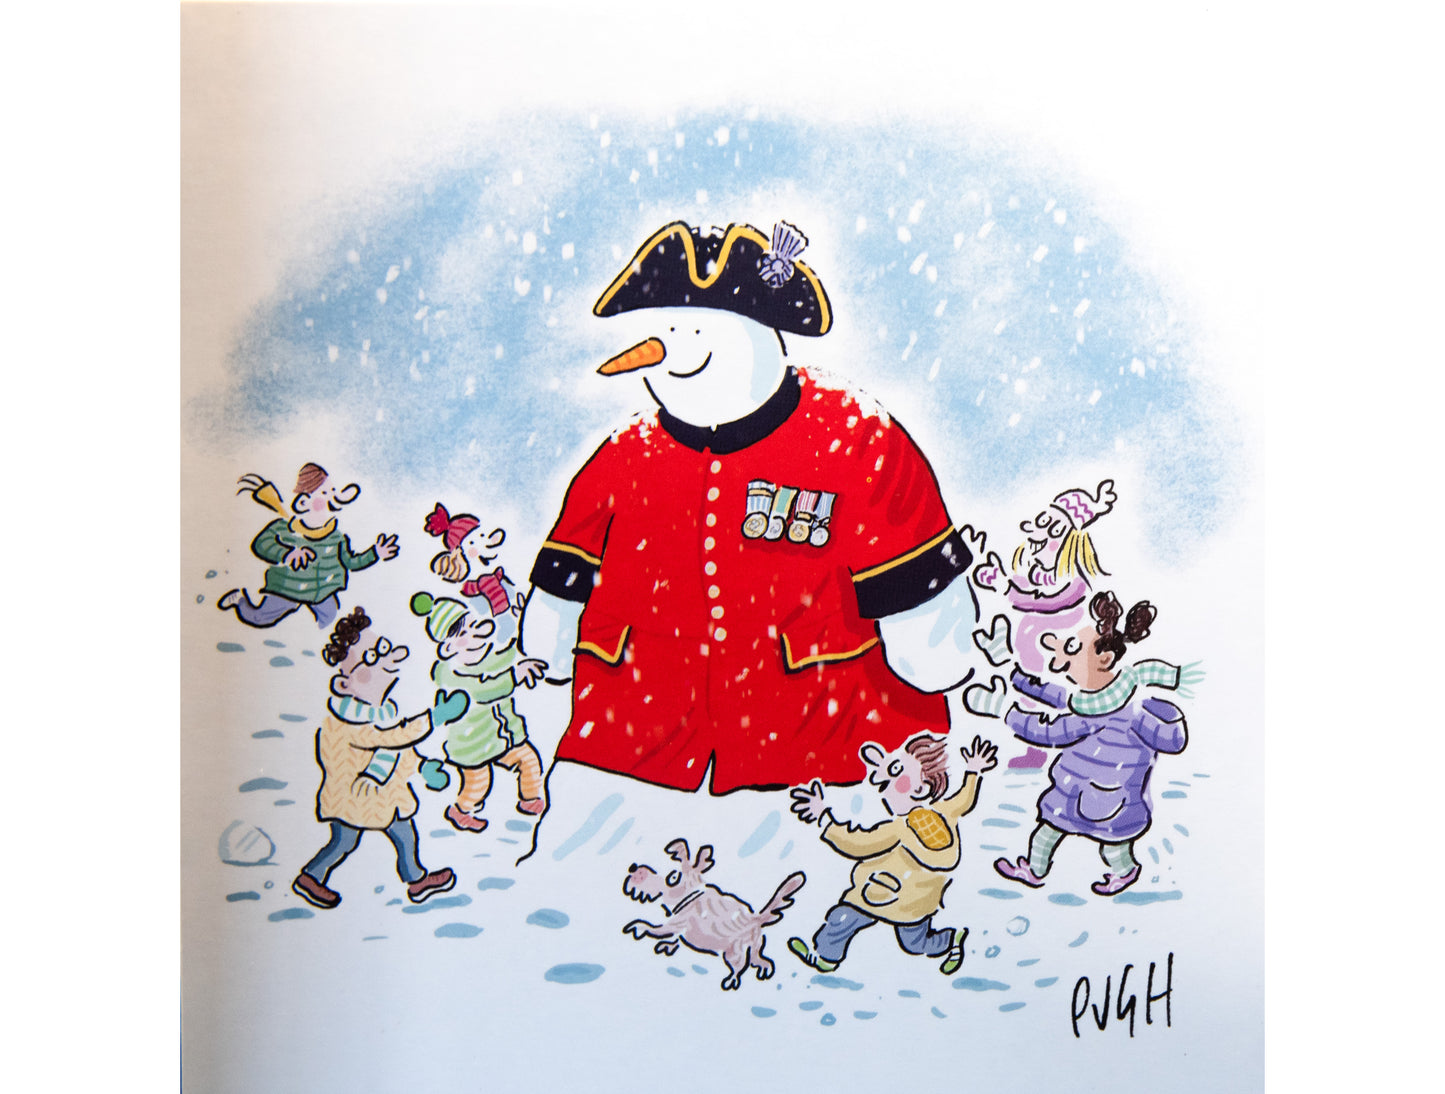 Chelsea Pensioner Snowman - Christmas Cards (10 Pack)